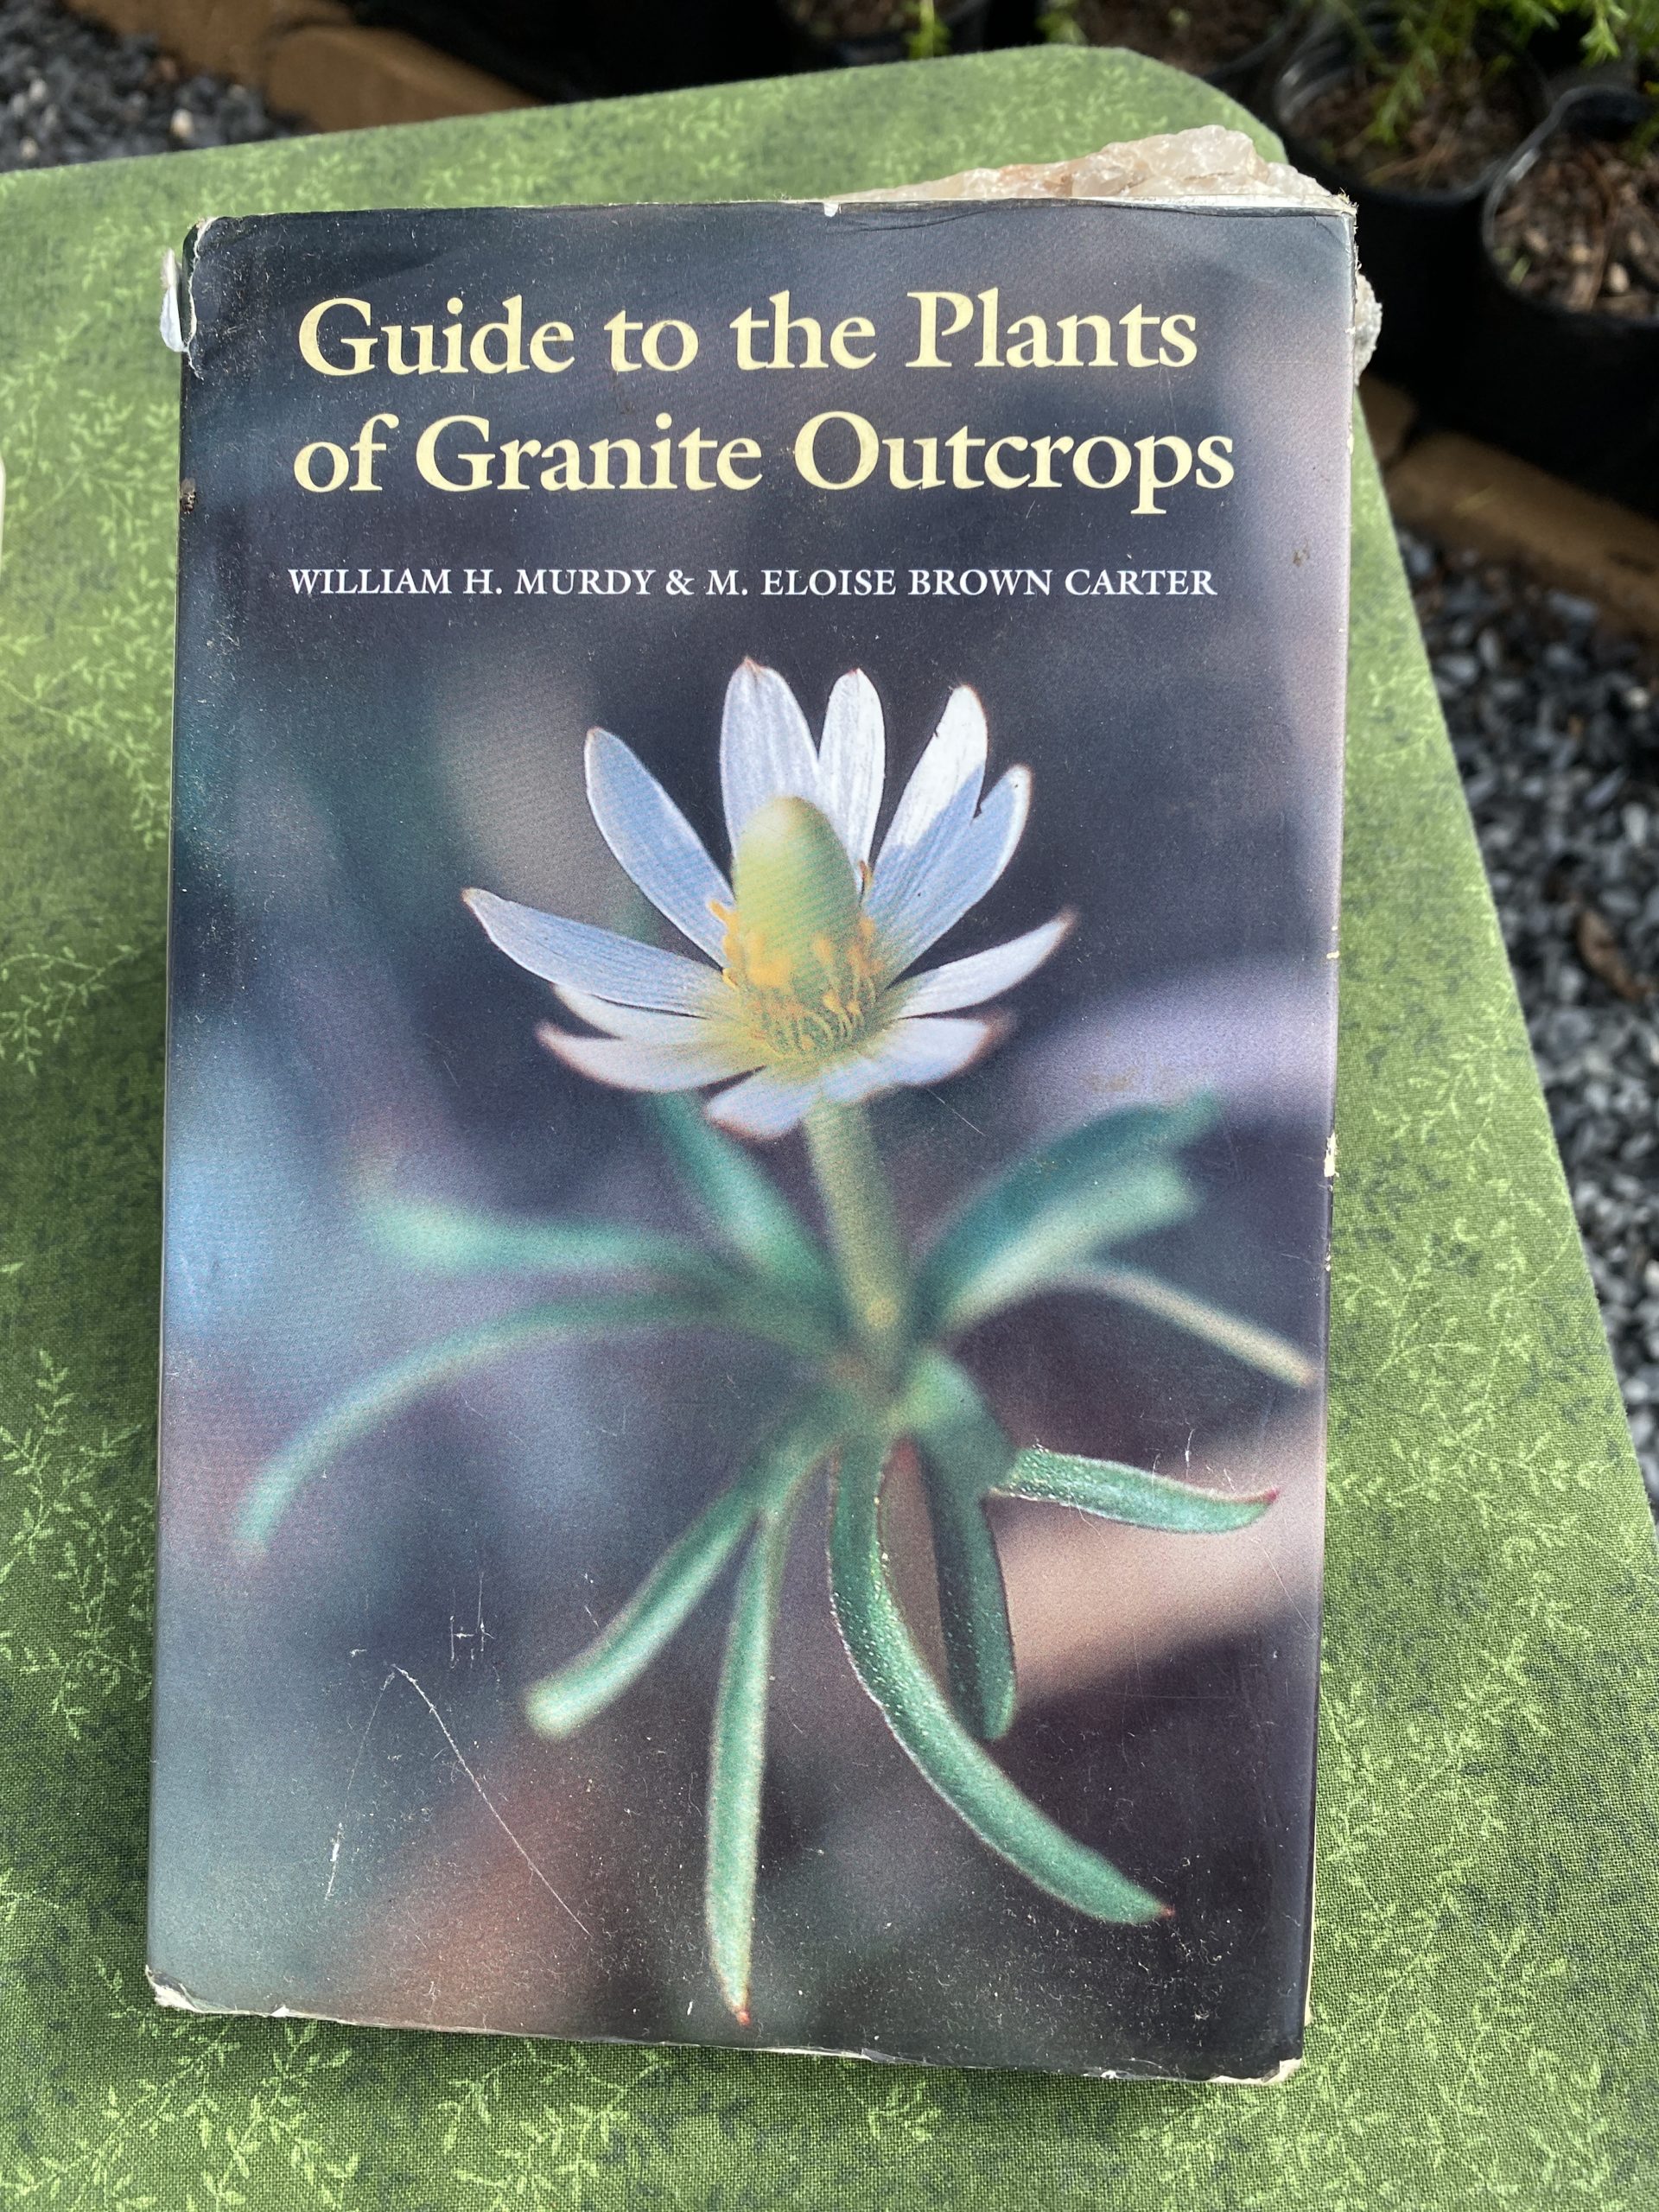 Guide to the Plants of the Granitic Outcrops by William H Murdy and M Eloise Brown Carter